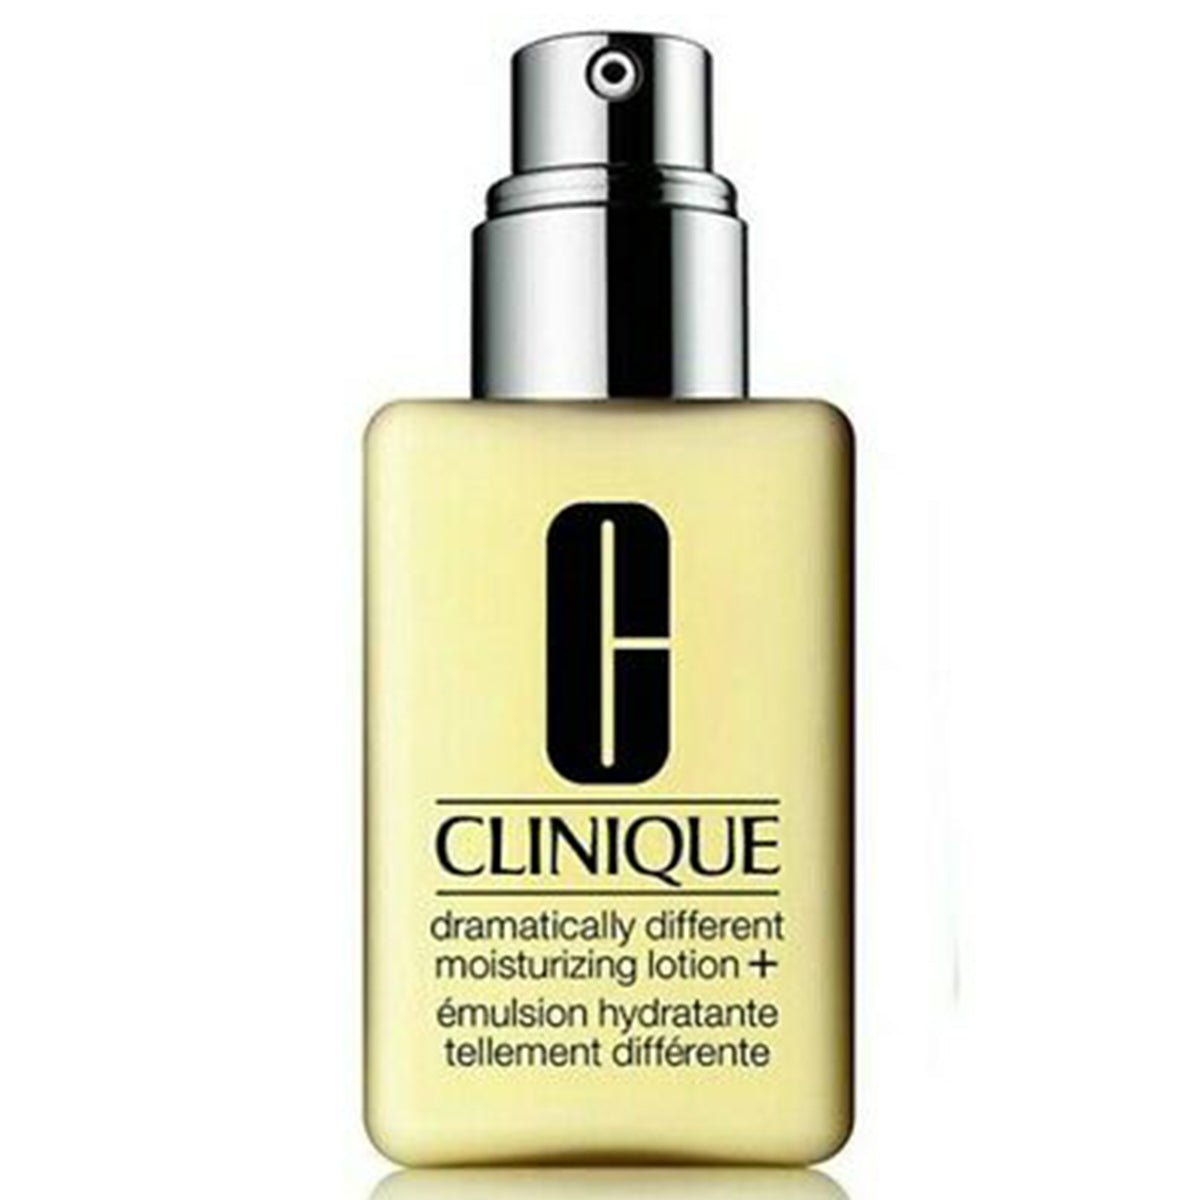 Clinique Dramatically Different Moisturizing Lotion 125 ml - AllurebeautypkClinique Dramatically Different Moisturizing Lotion 125 ml